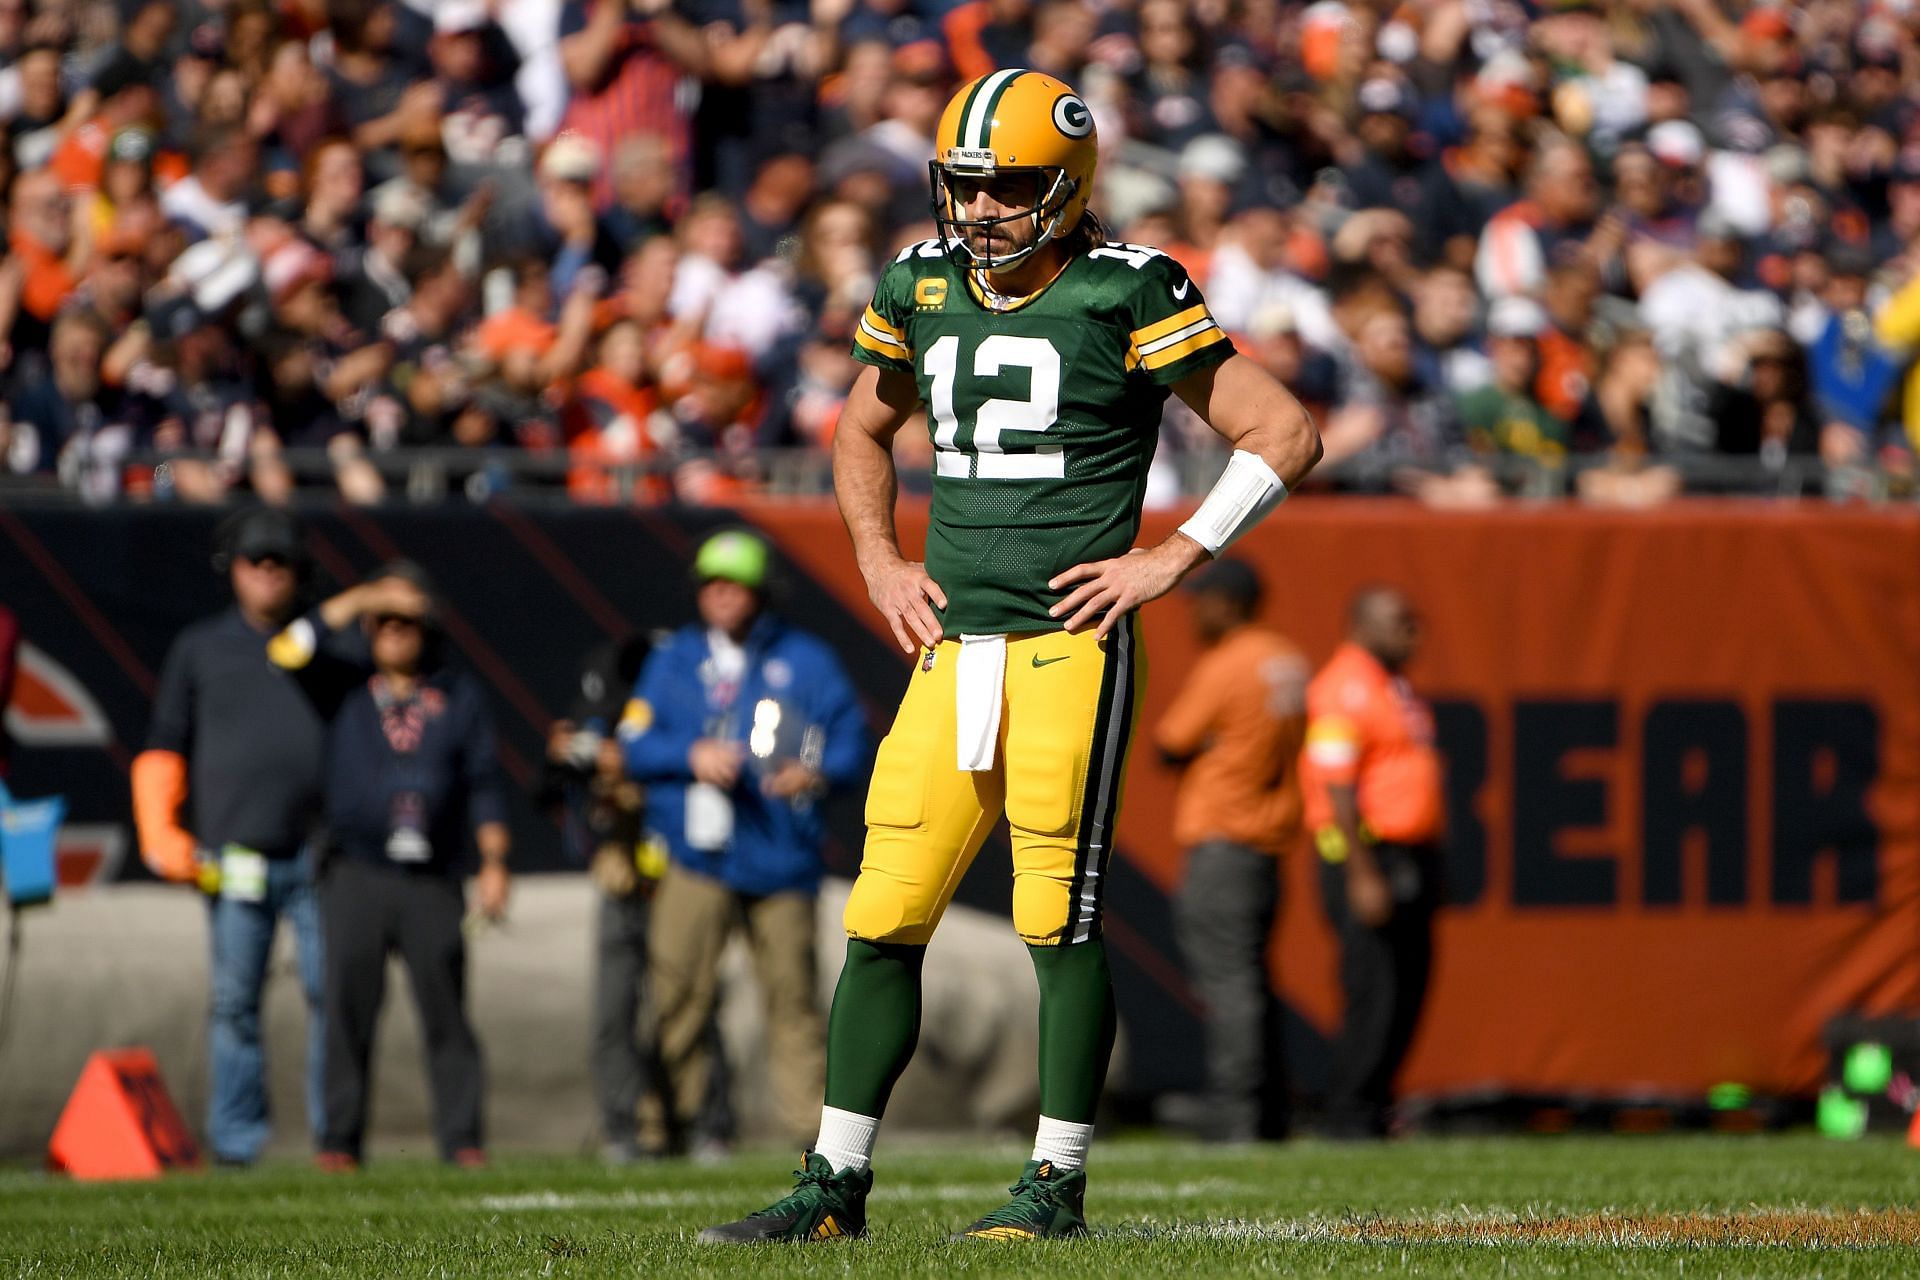 Aaron Rodgers, to retire or not to retire?